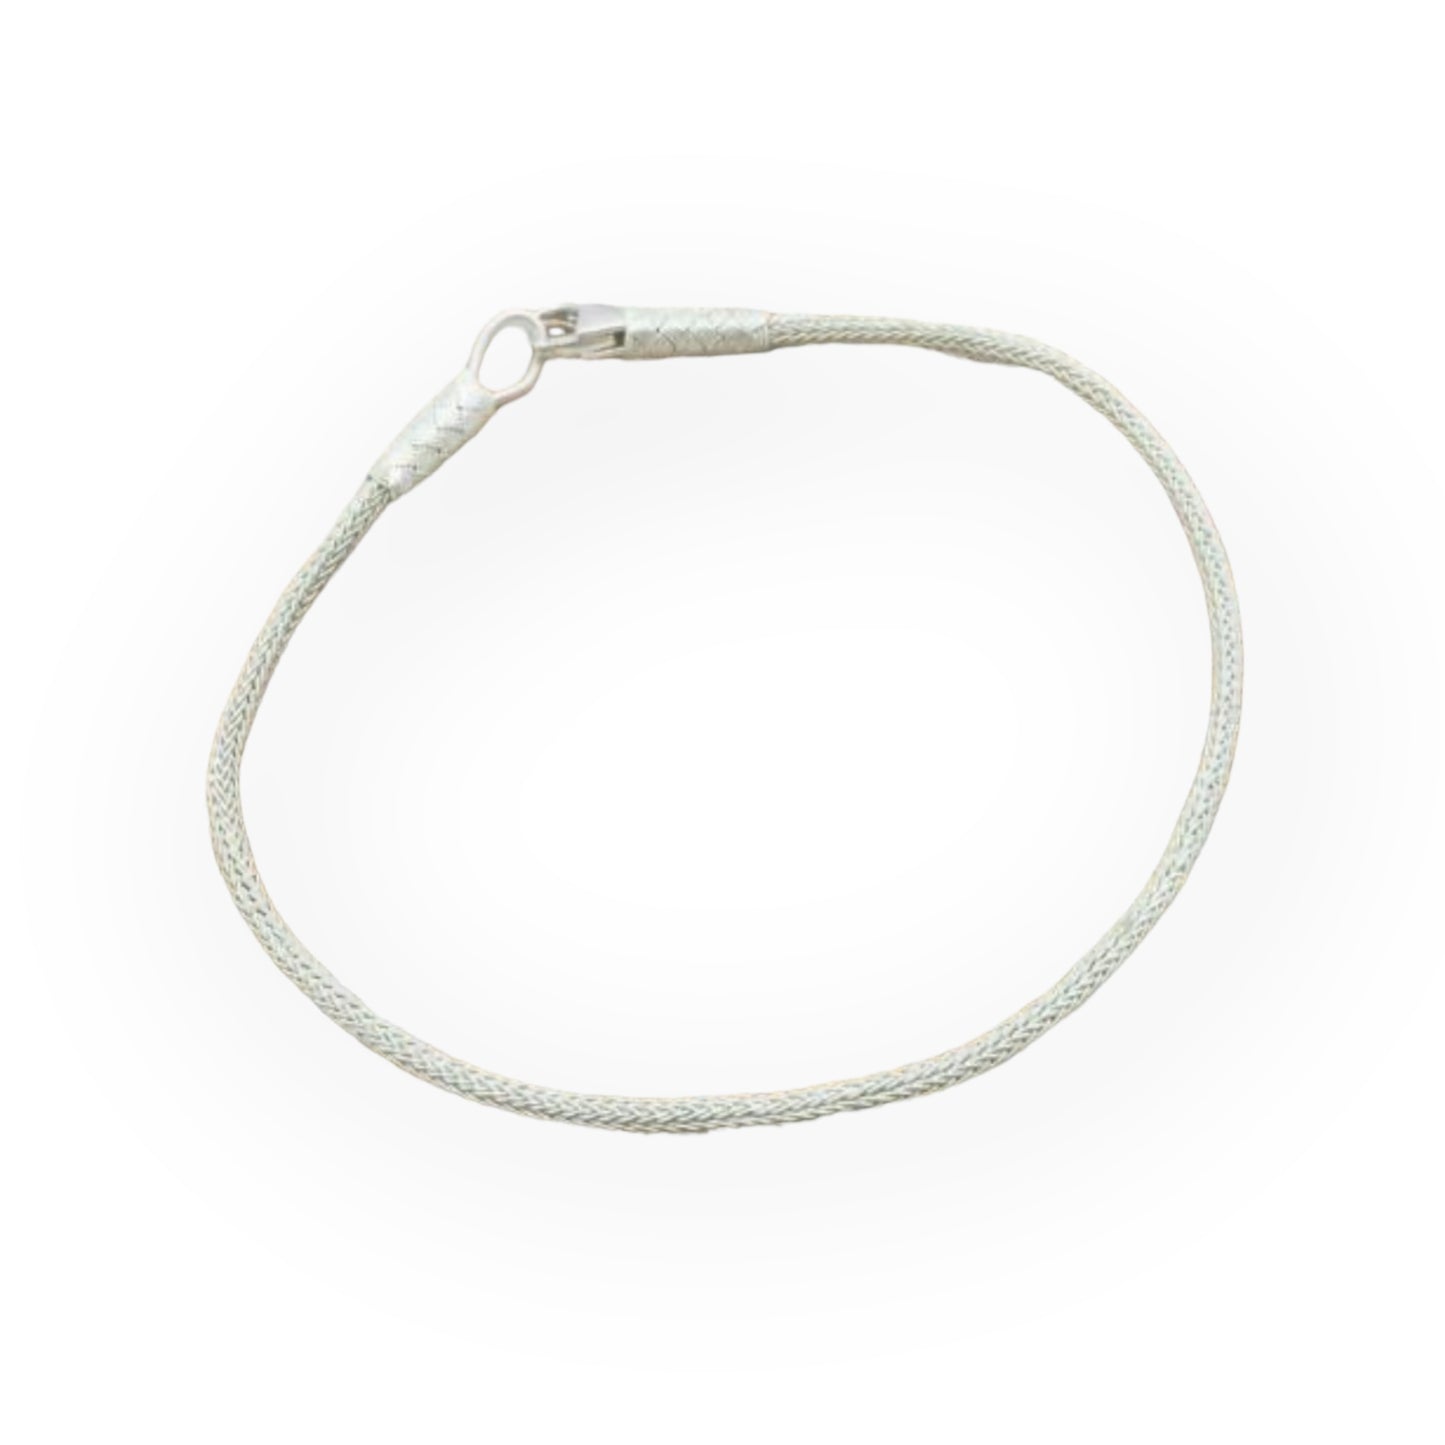 Bracelet - Handmade of Pure Silver Wires (1000 carat silver)